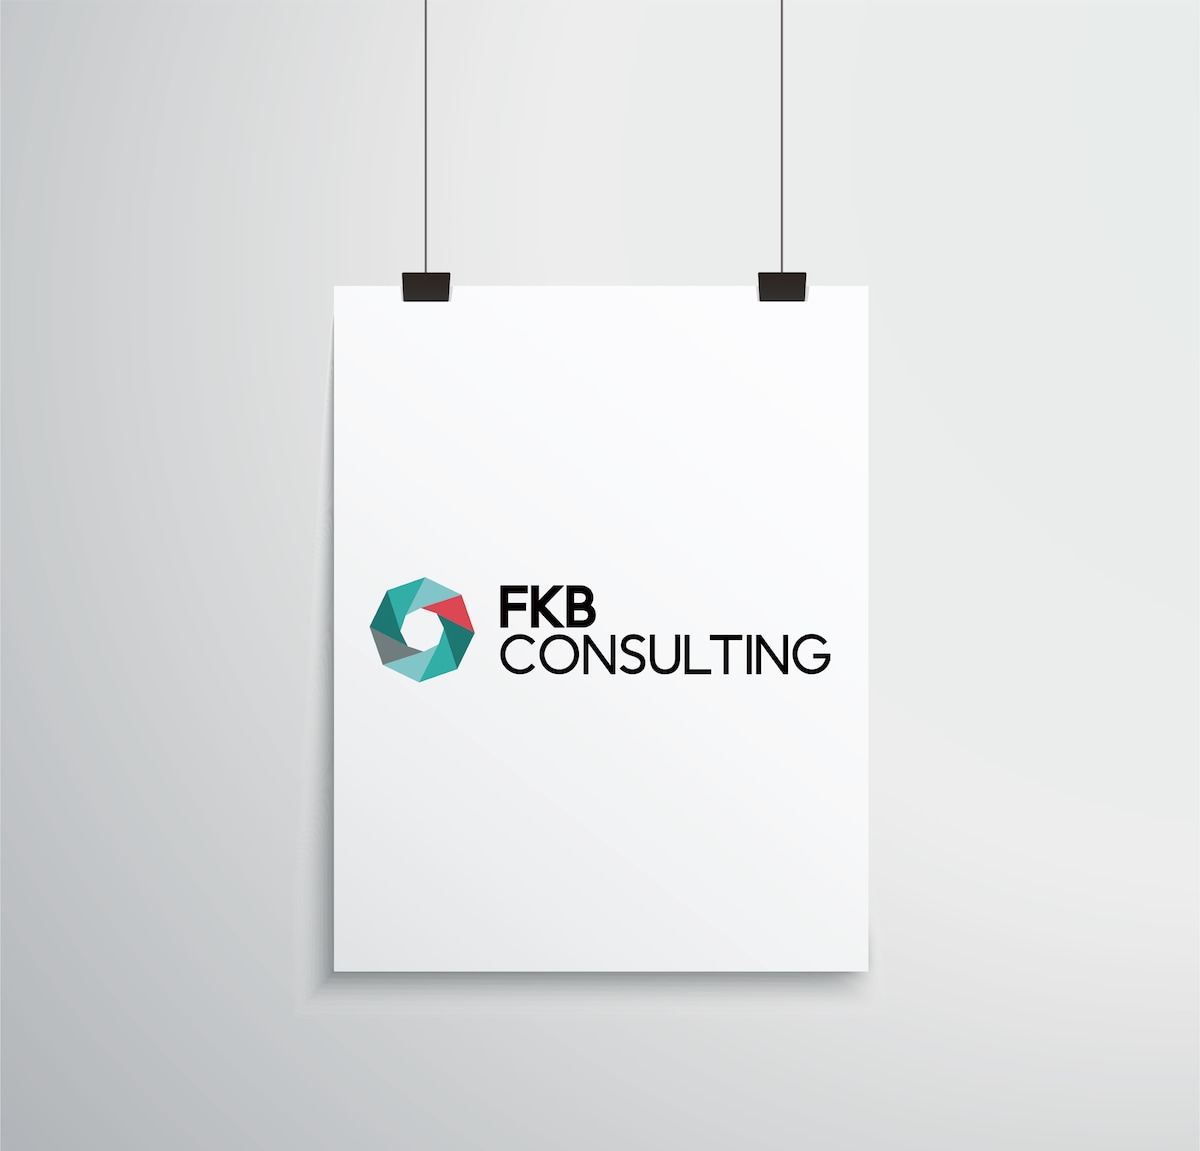 FKB CONSULTING